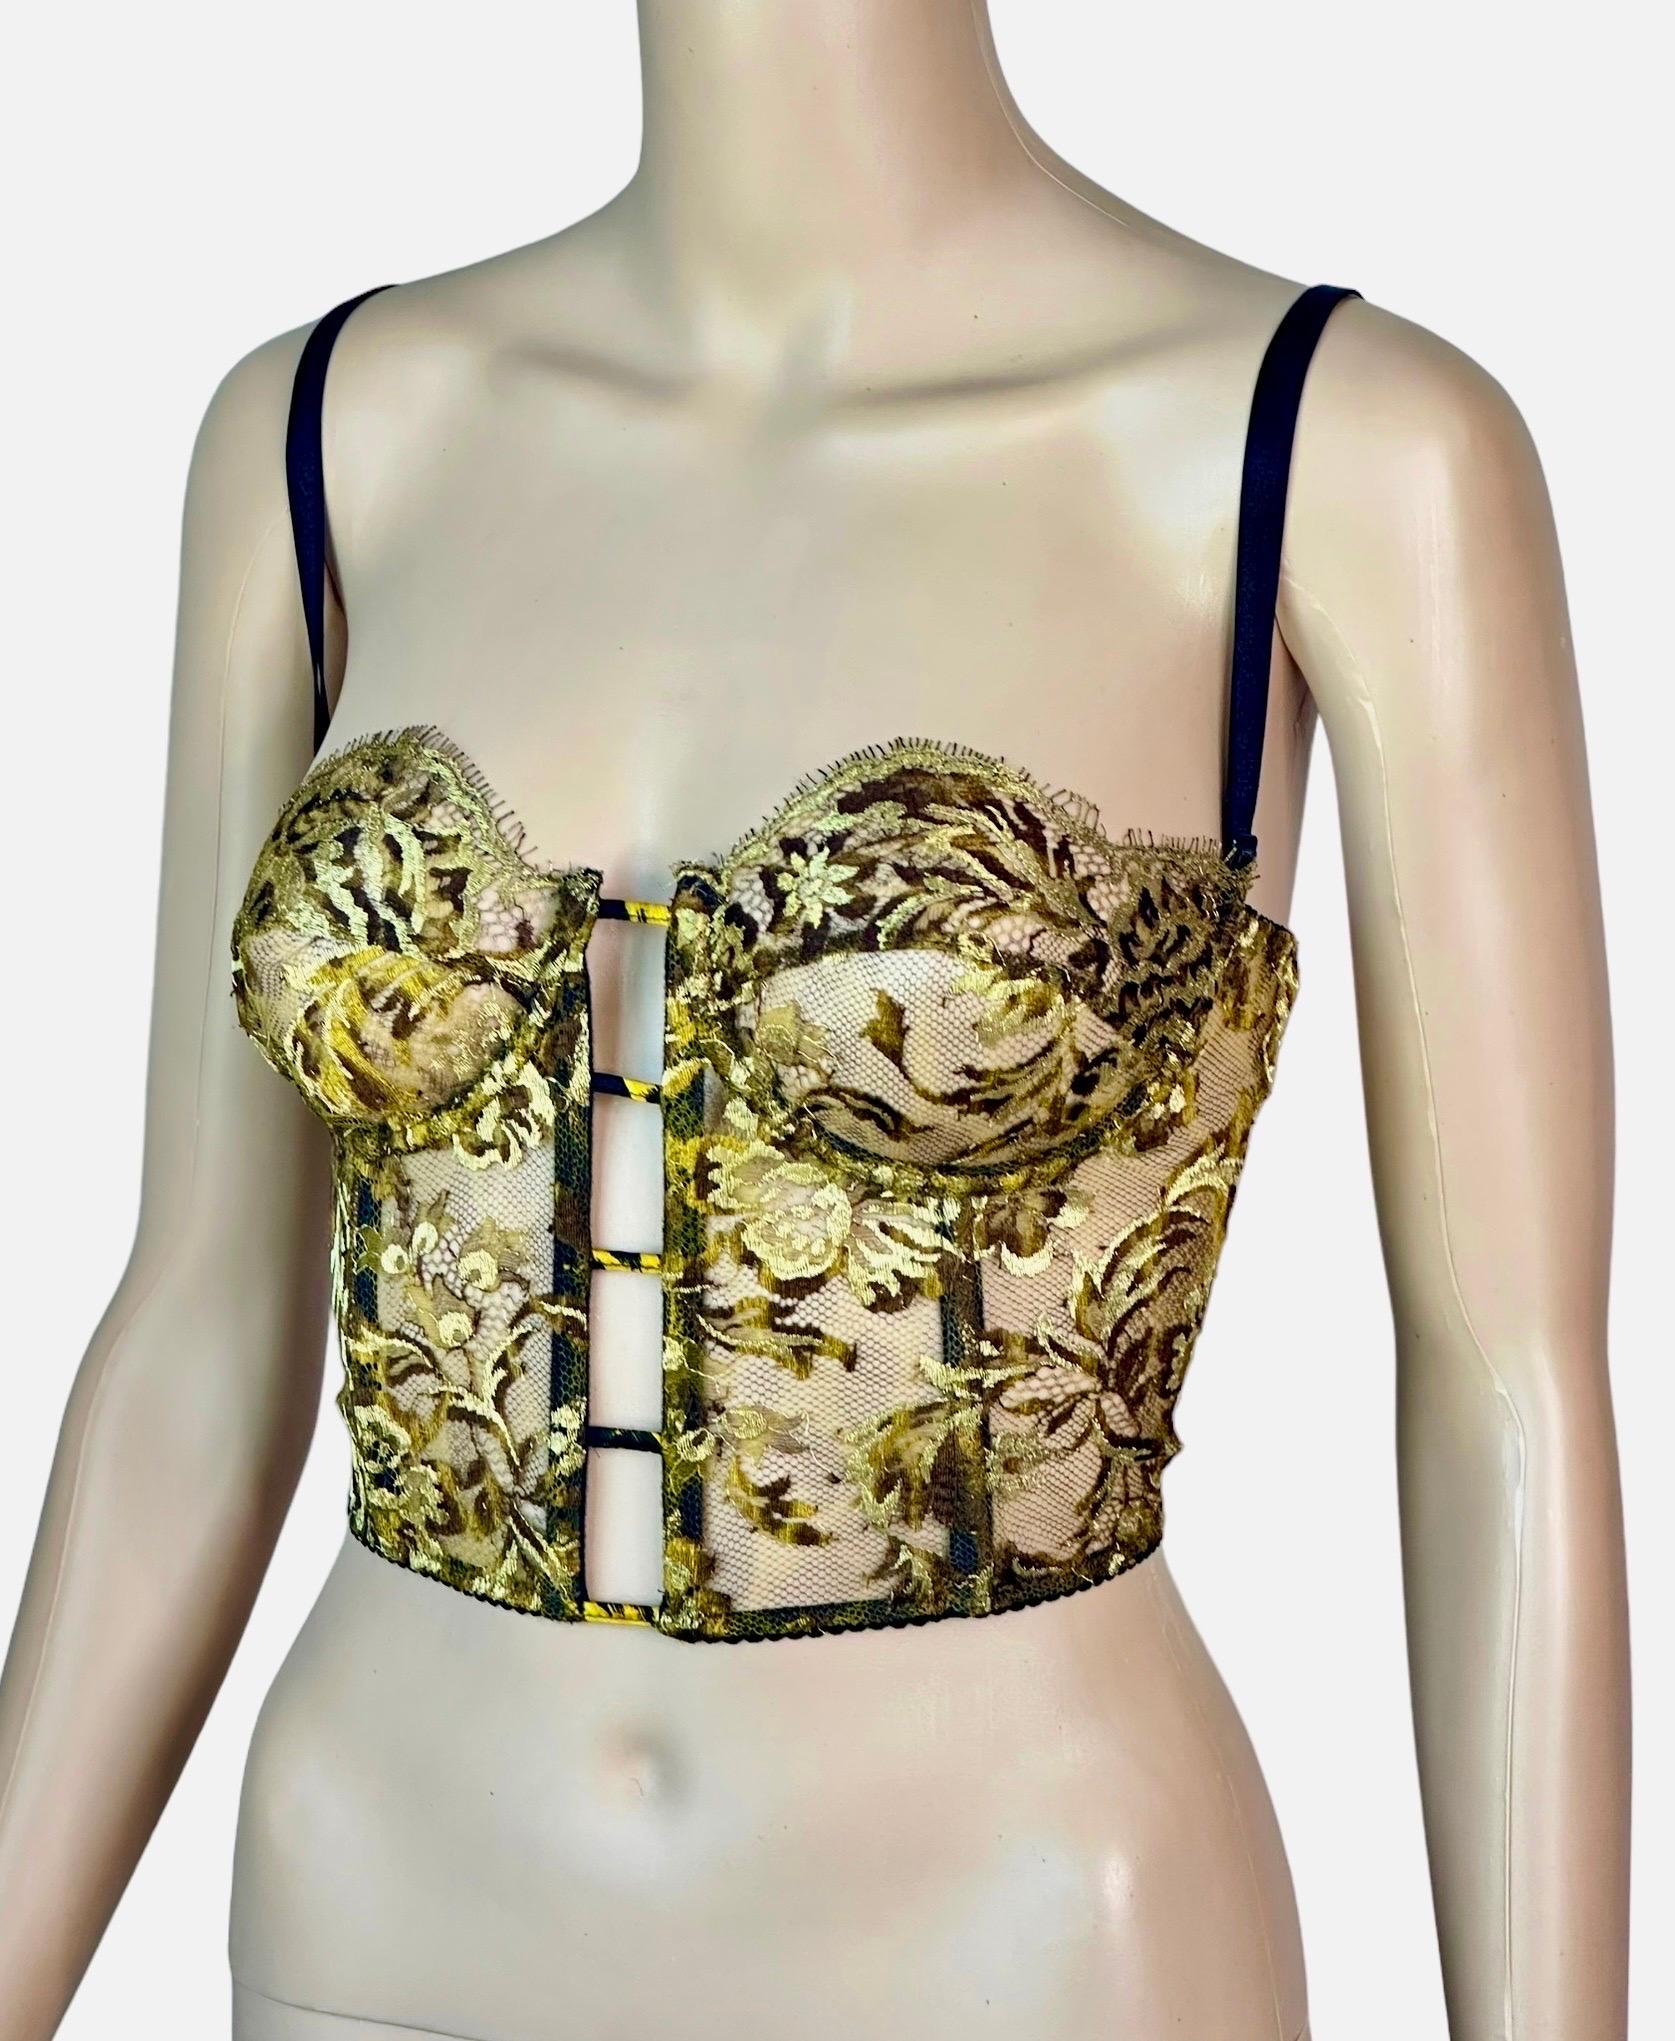 Gianni Versace Intimo S/S 1992 Unworn Sheer Gold Embroidered Lace Bustier Bra Crop Top 

Condit : Neuf avec étiquettes

Taille : IT 46 - petit 